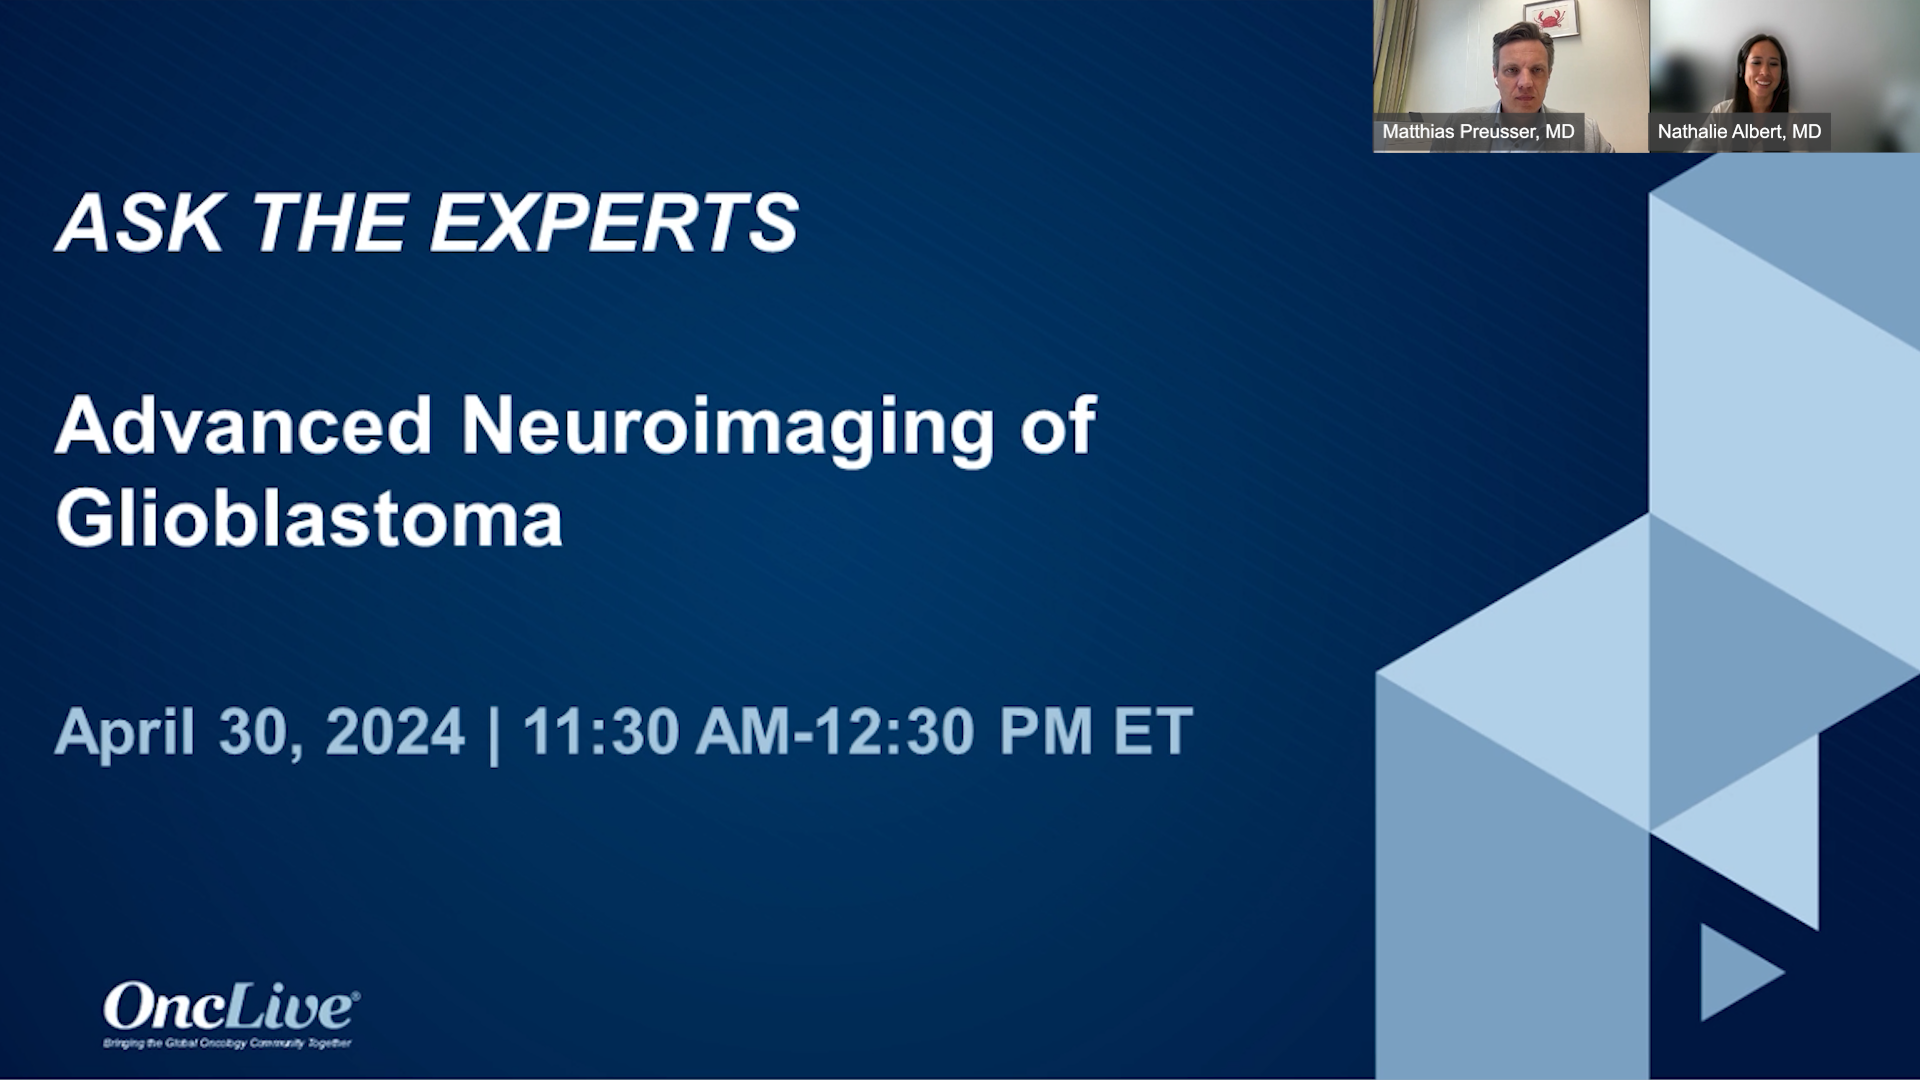 OncLive - "ASK THE EXPERTS: Advanced Neuroimaging of Glioblastoma"